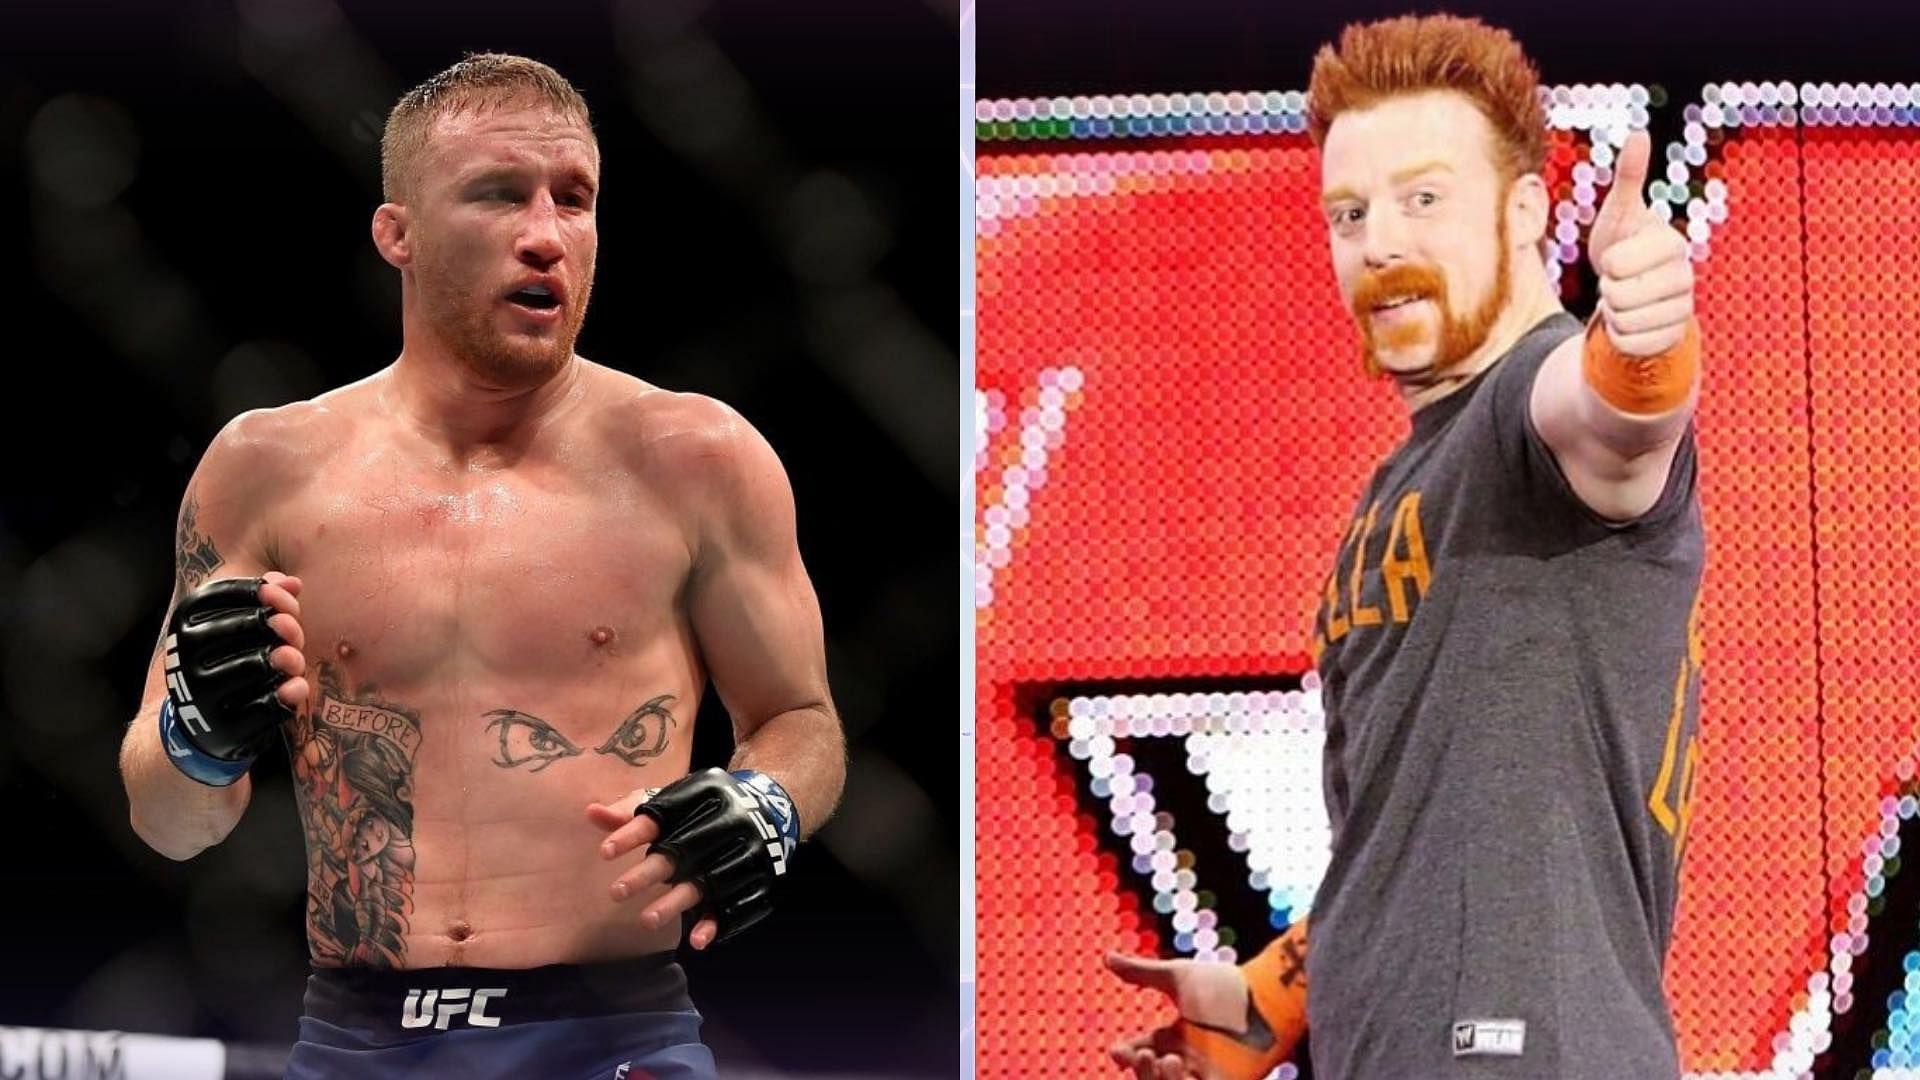 Justin Gaethje would fit in with the Brawling Brutes.